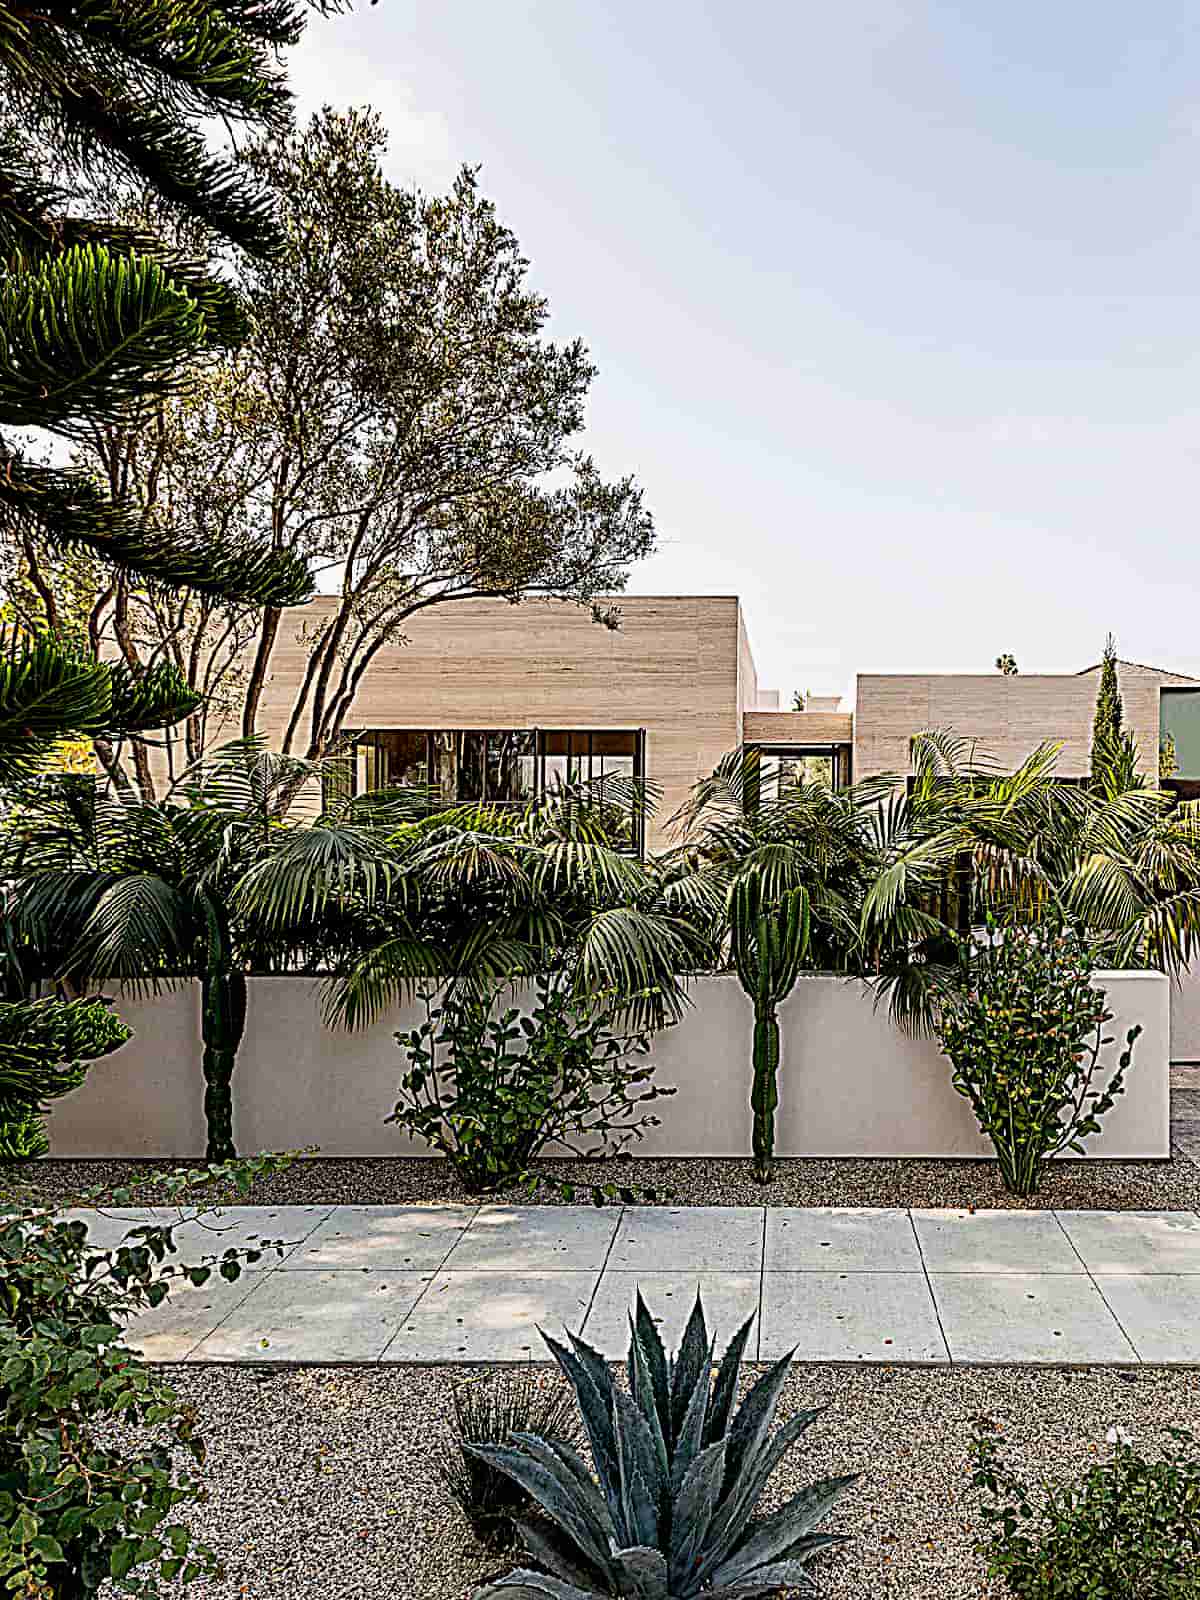 Conceived as an Urban Oasis this residence in Venice Beach, California. Antwerp architect Kanika designs a vibrant Urban Oasis in Venice Beach, California; Victoria an Urban Oasis